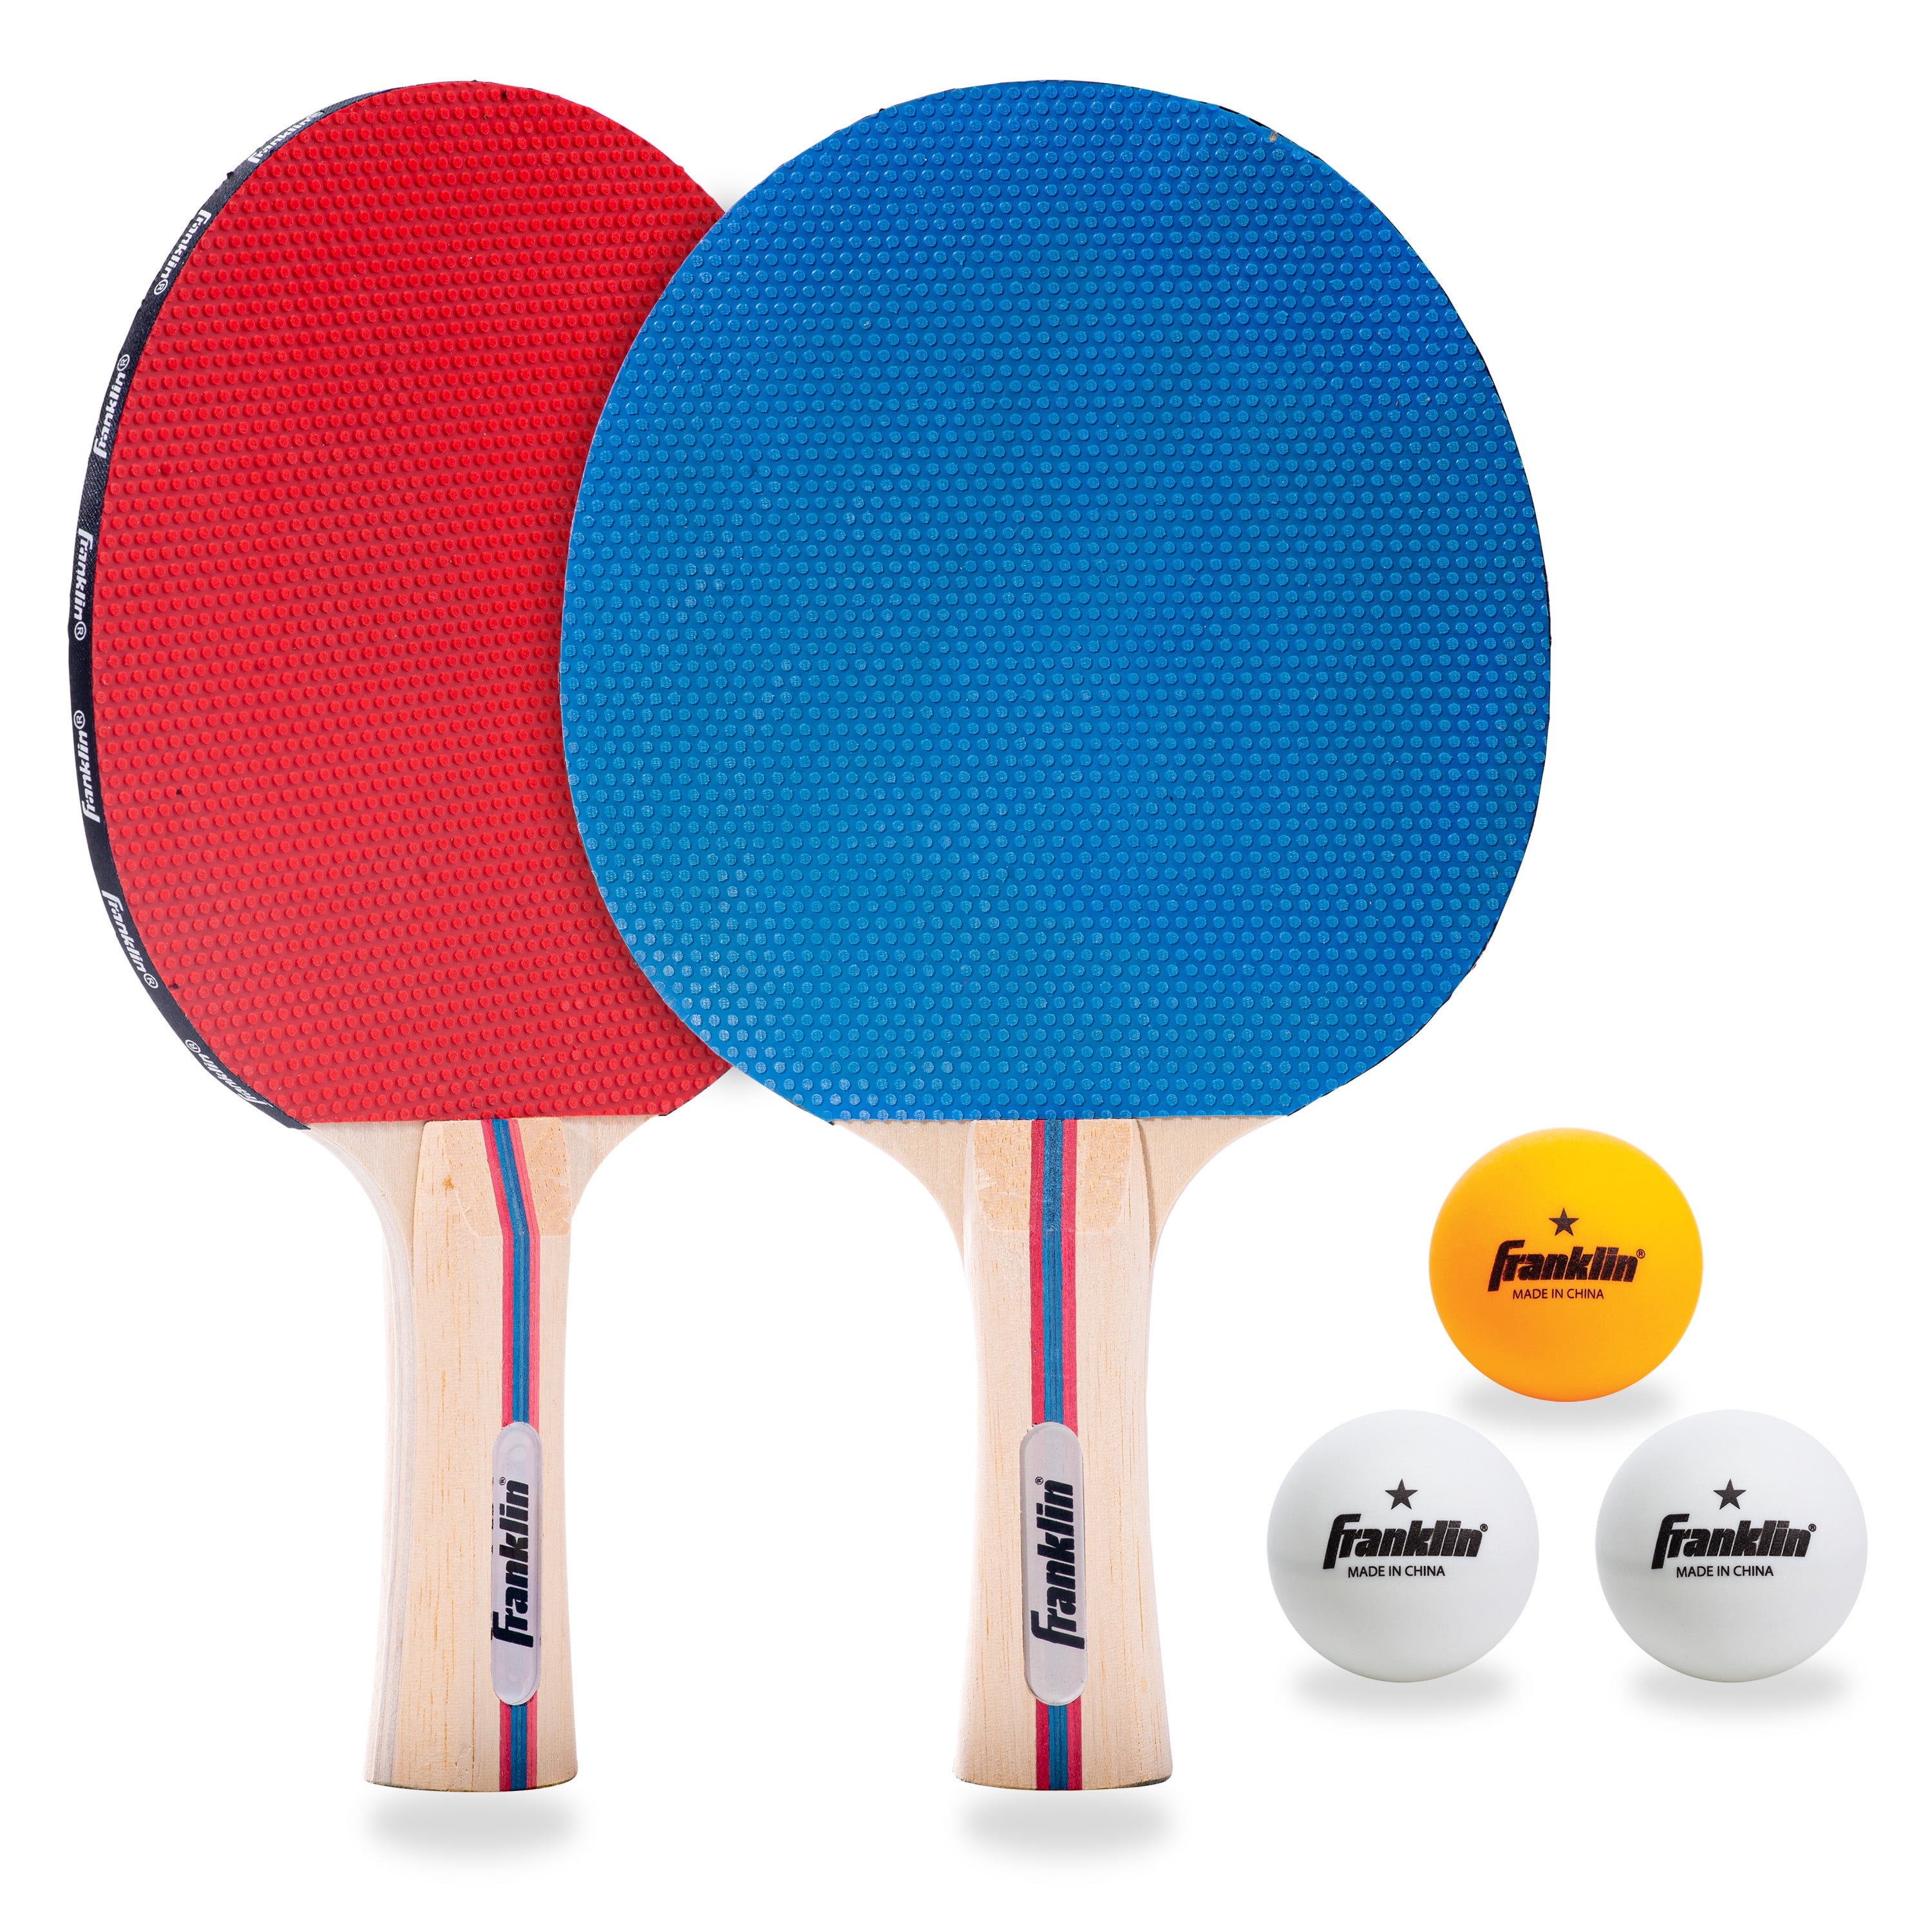 2 Player Table Tennis Ping Pong Set Includes 3 Balls Two Paddle Bats Game  Nice 